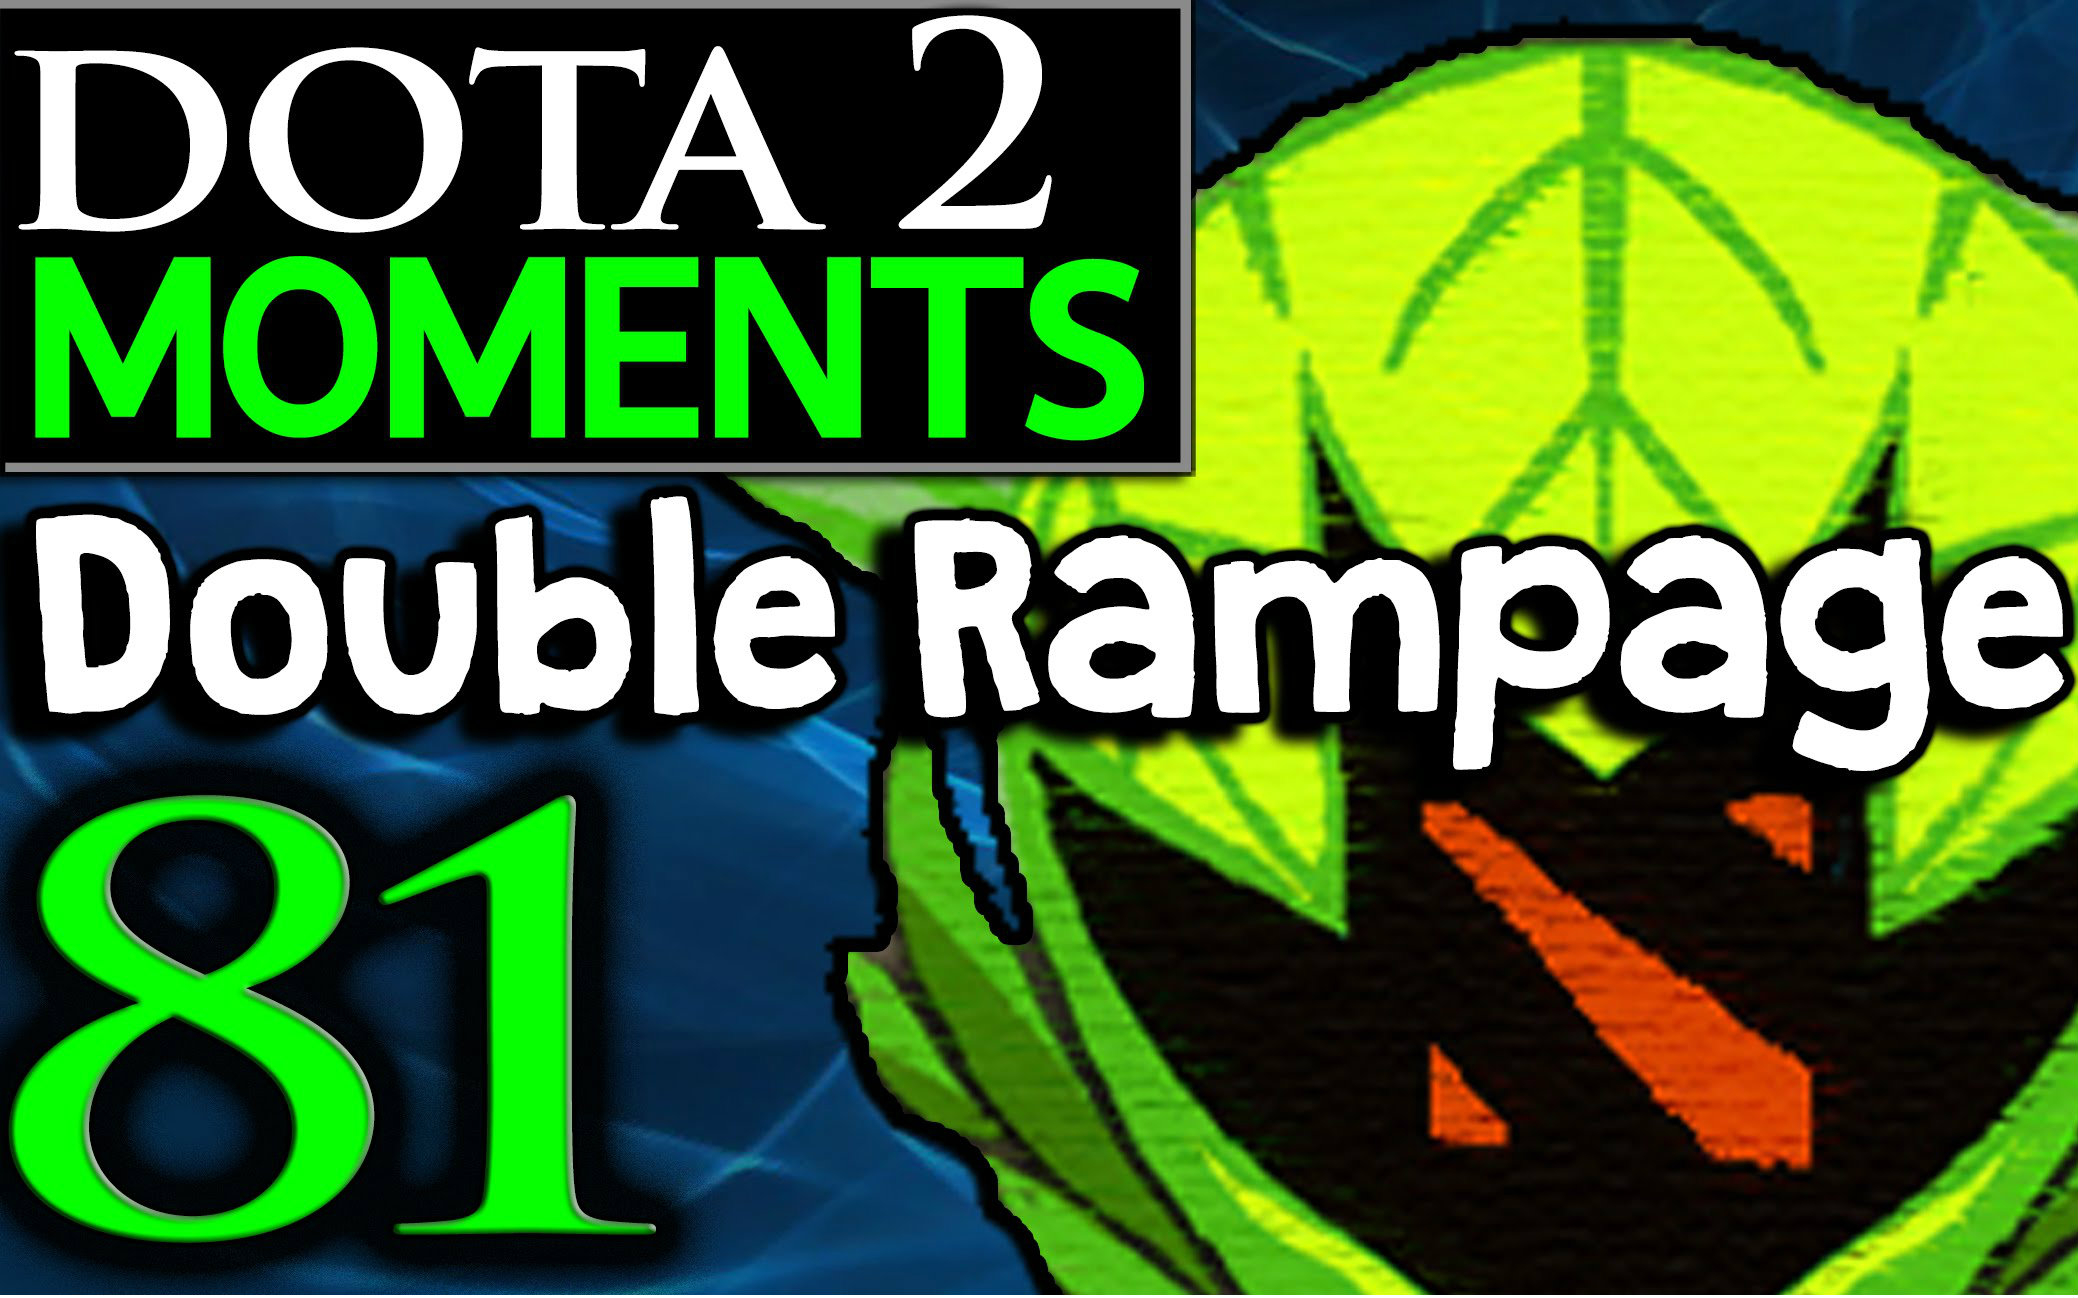 dota 2 moments #81 - double rampage